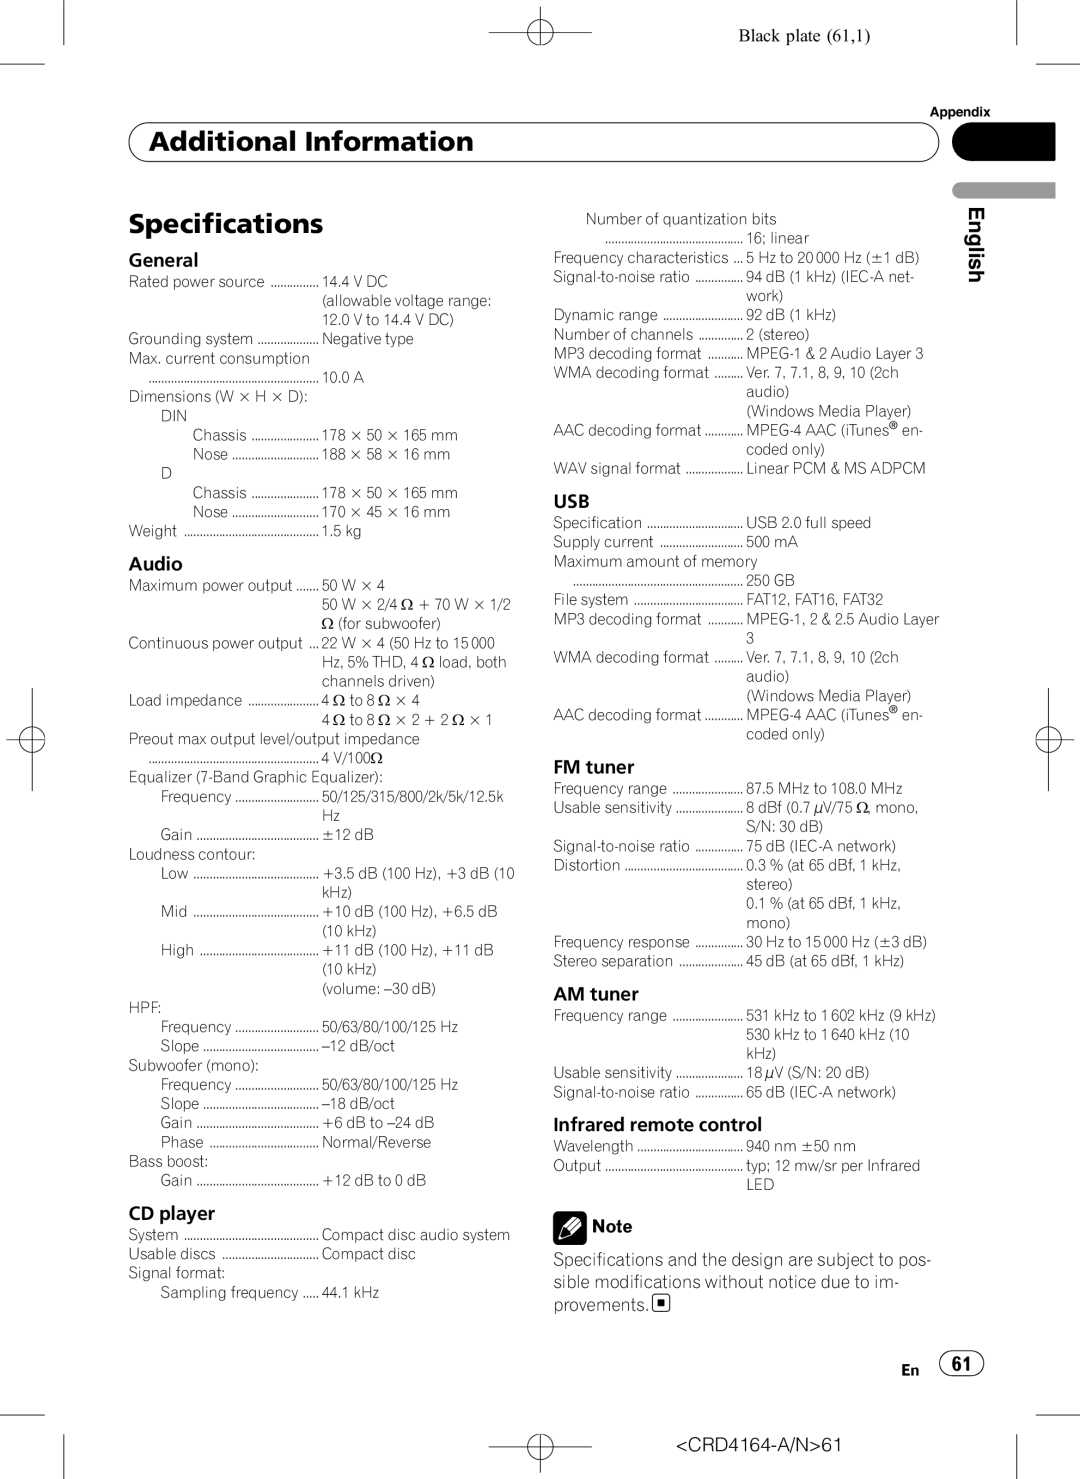 Pioneer DEH-P7950UB operation manual Specifications, Black plate 61,1, Additional Information, English 